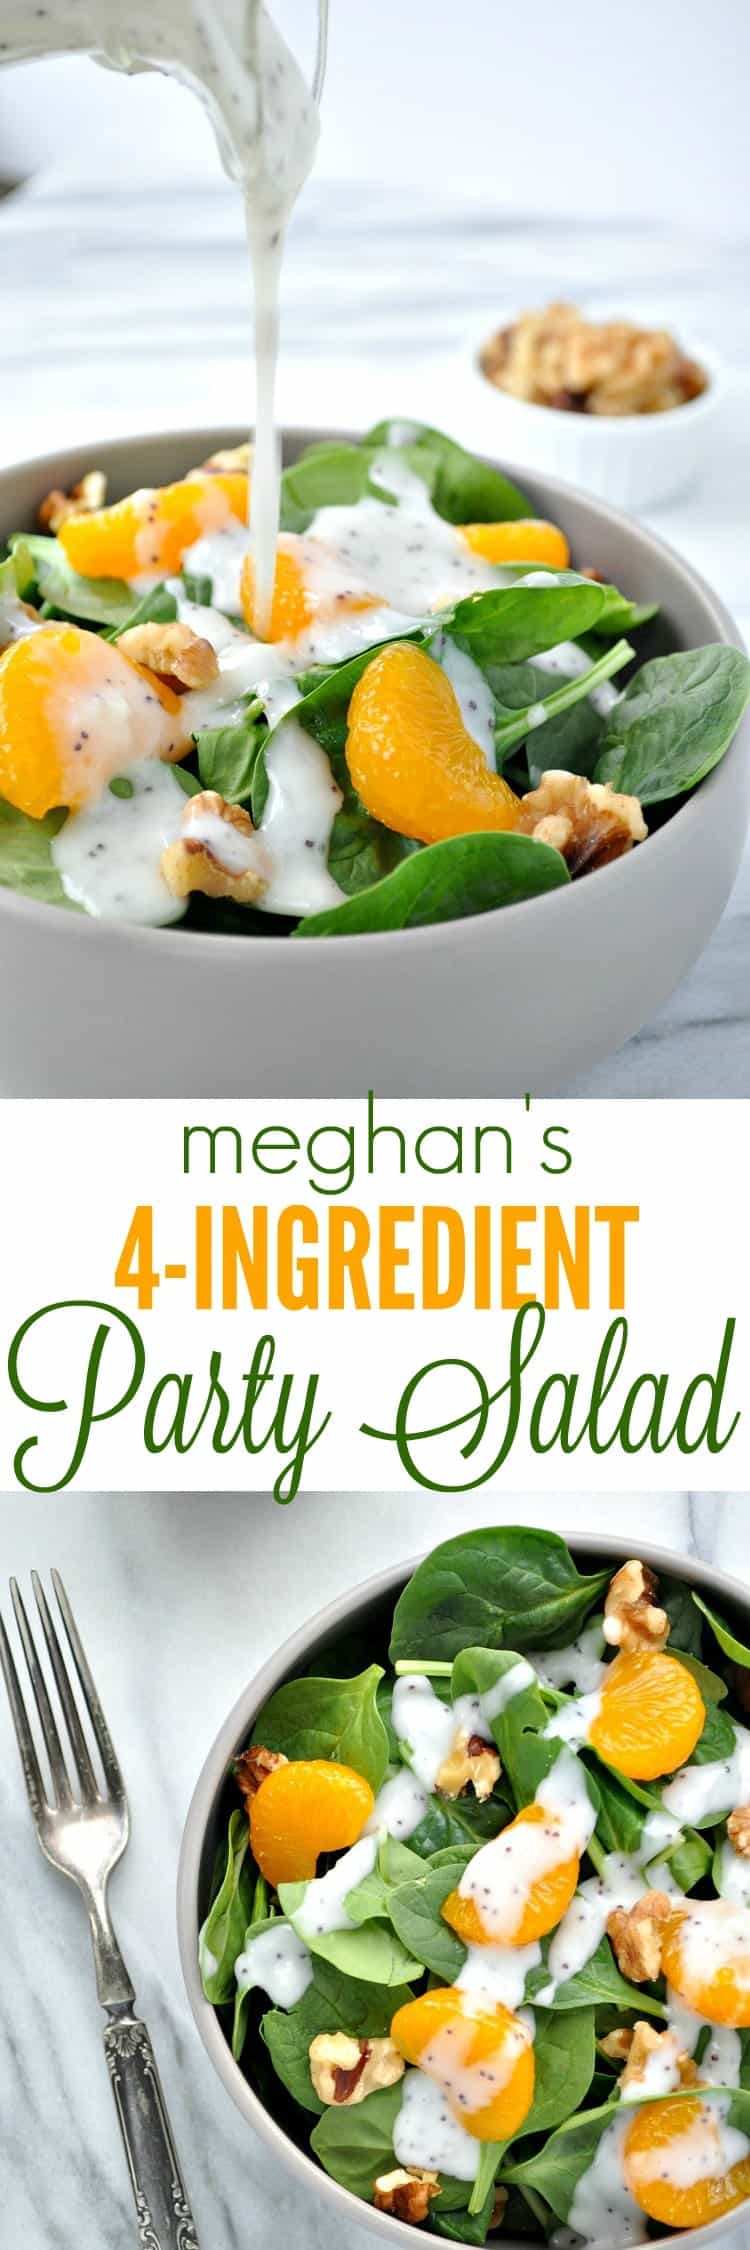 Two stacked images show a bowl of party salad - a spinach salad topped with walnuts, mandarin orange slices, and a creamy poppyseed dressing. Text on the image reads "Meghan's 4-ingredient party salad"